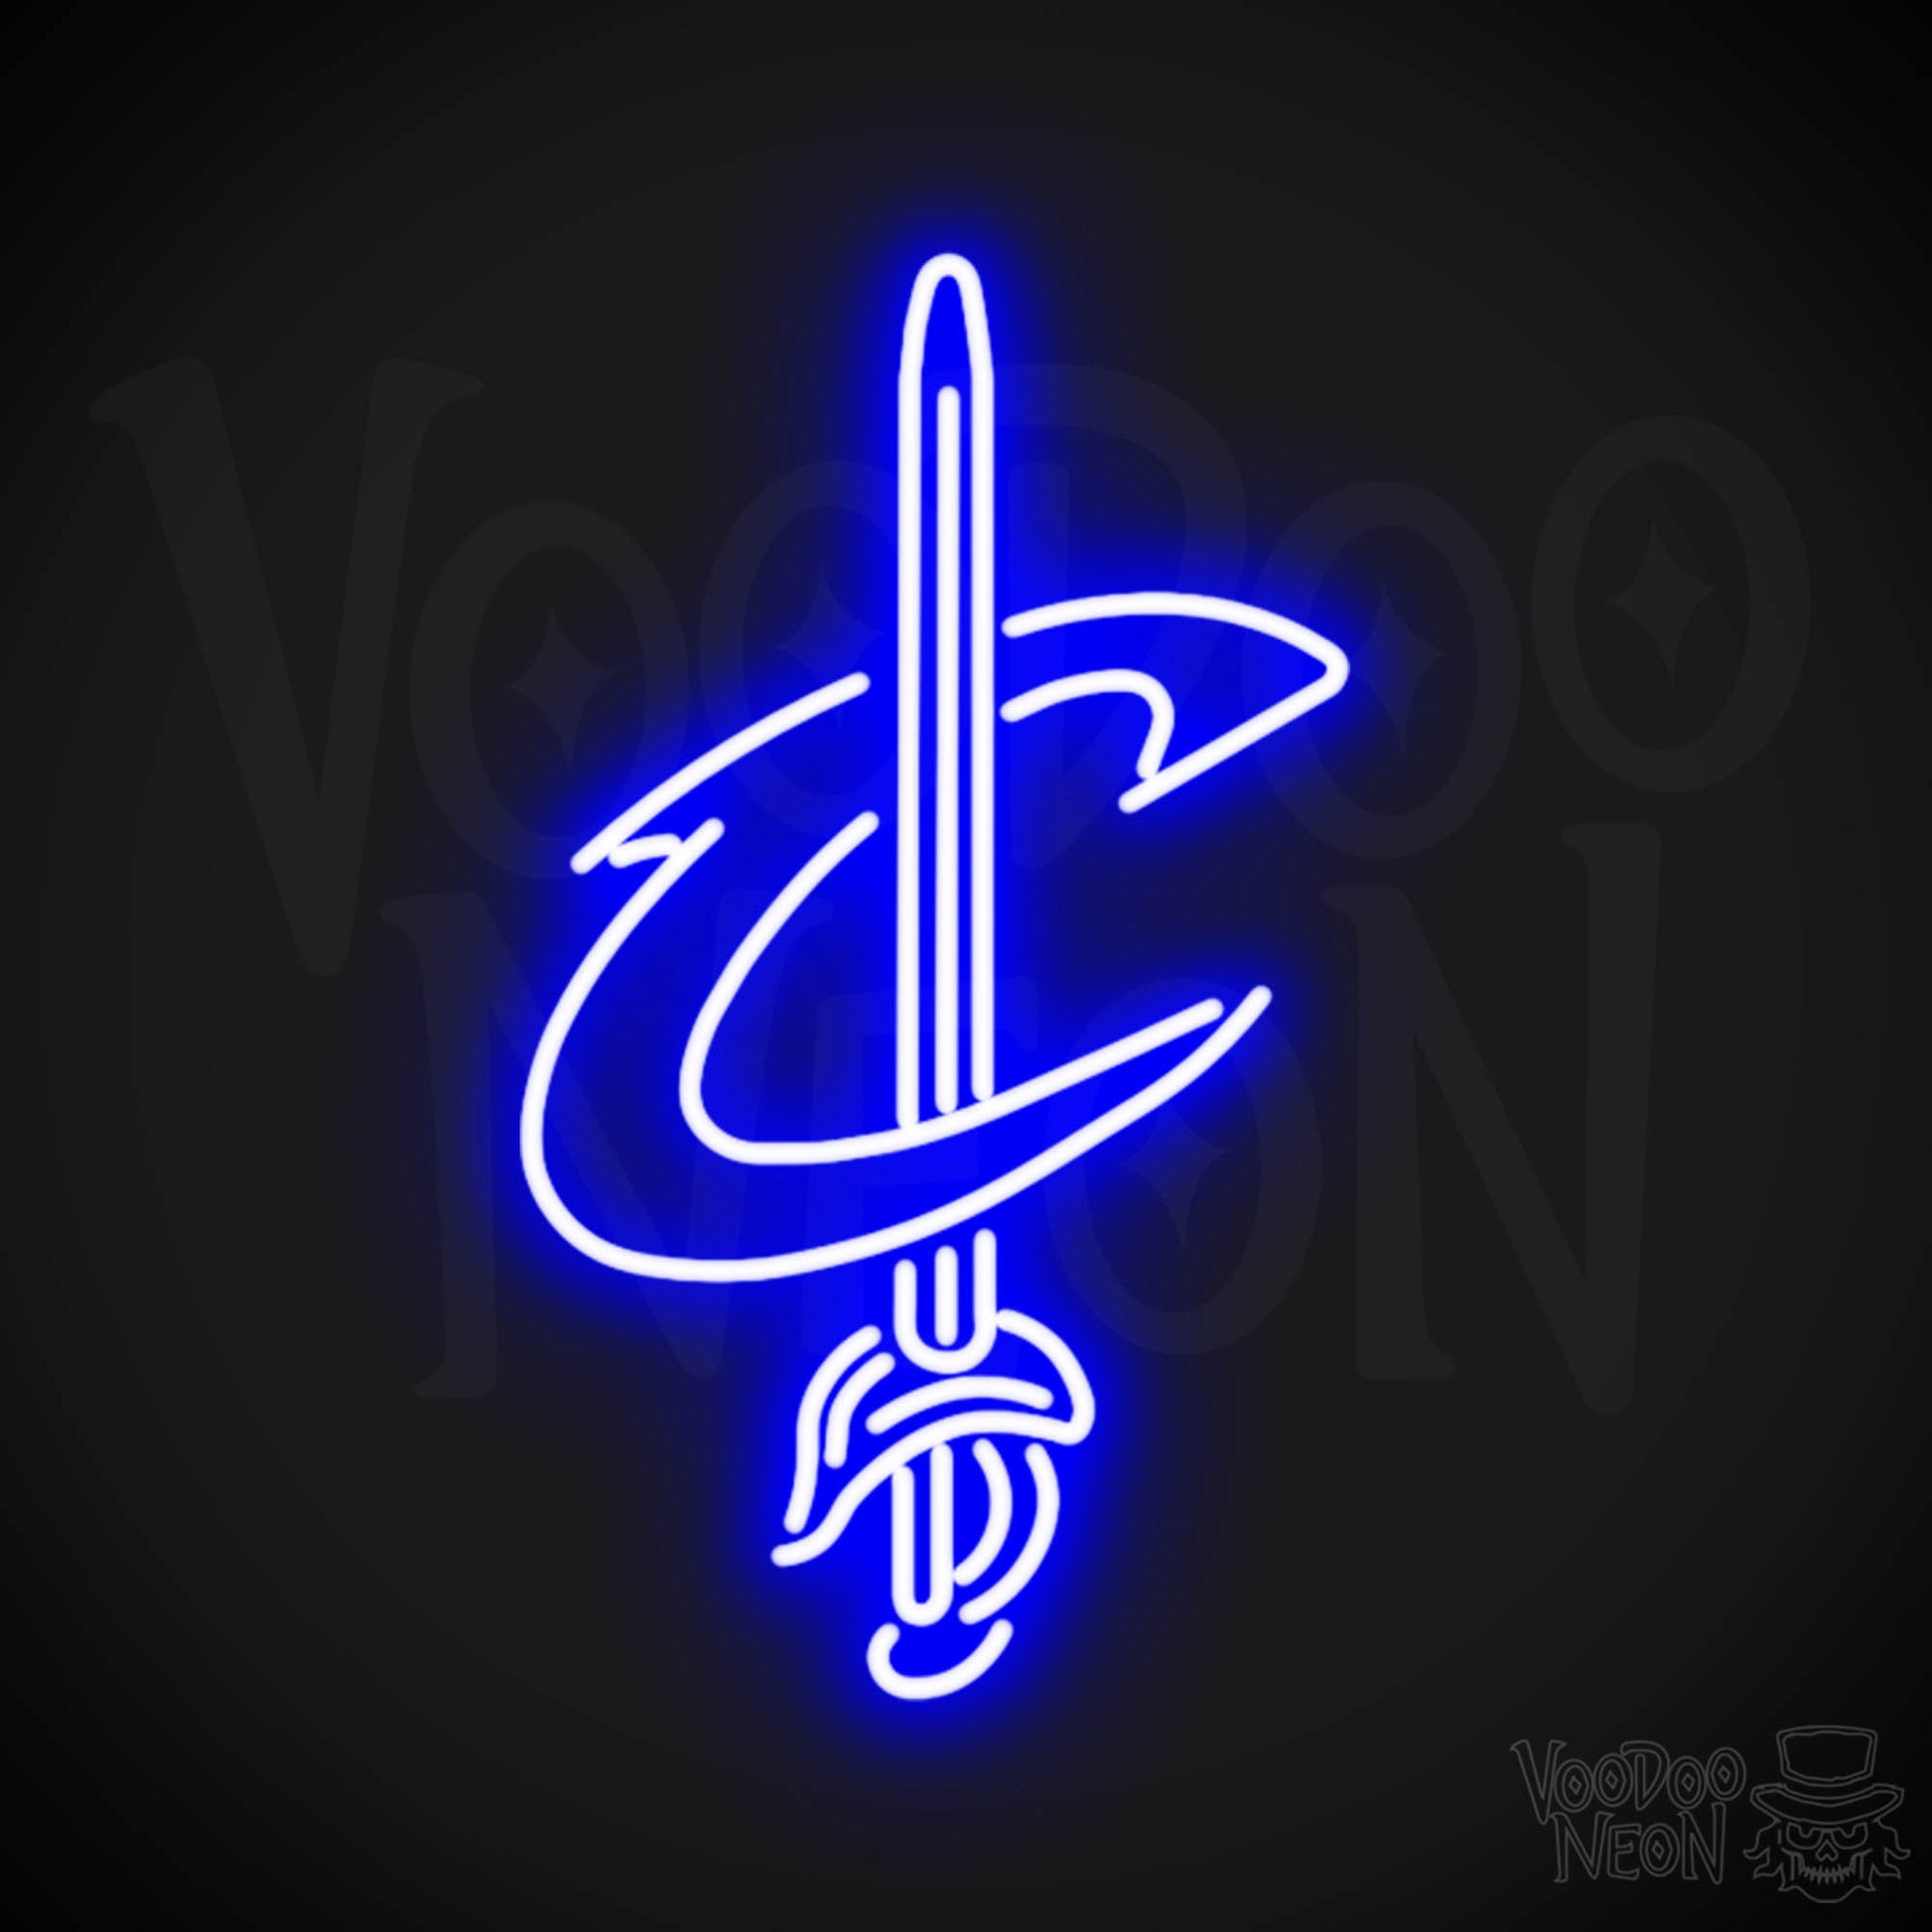 Cleveland Cavaliers Neon Sign - Cleveland Cavaliers Sign - Neon Cavaliers Wall Art - Color Dark Blue